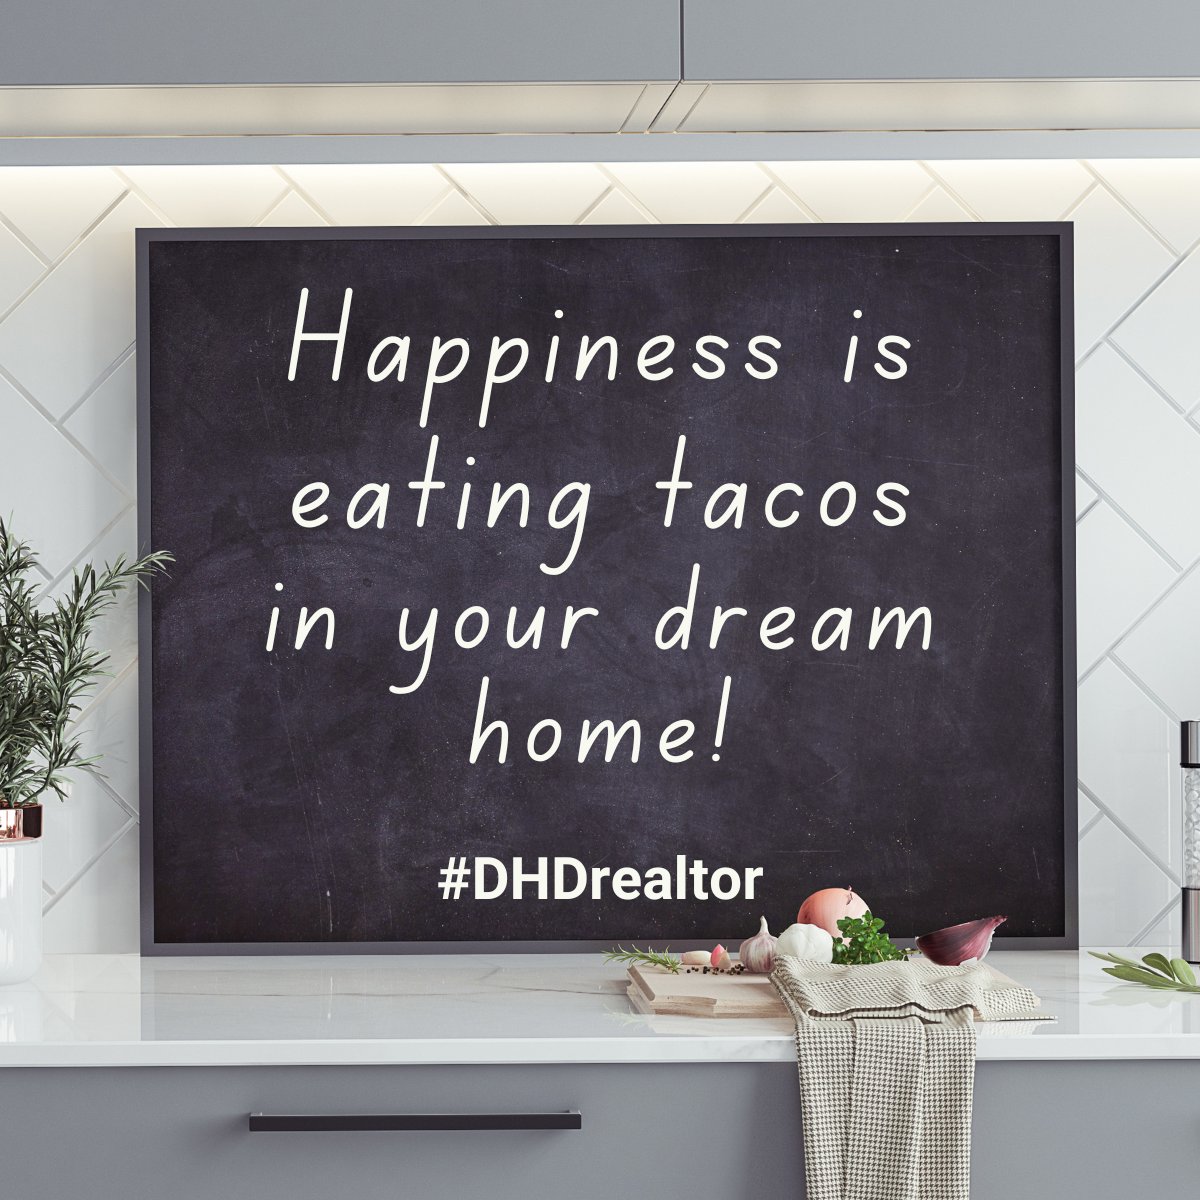 🌮  Let’s taco ‘bout how I can help make this happen! 🏘️
#buyahome #tacotaco #intacoswetrust #Ilovetacos #firsttimehomebuyers #stoprenting #buyrealestate #homebuyingprocess #homegoals #realtor #realestategoals #DonnaHaynesDwyer #DHDrealtor #eXprealty #DHDhomes #eXpproud